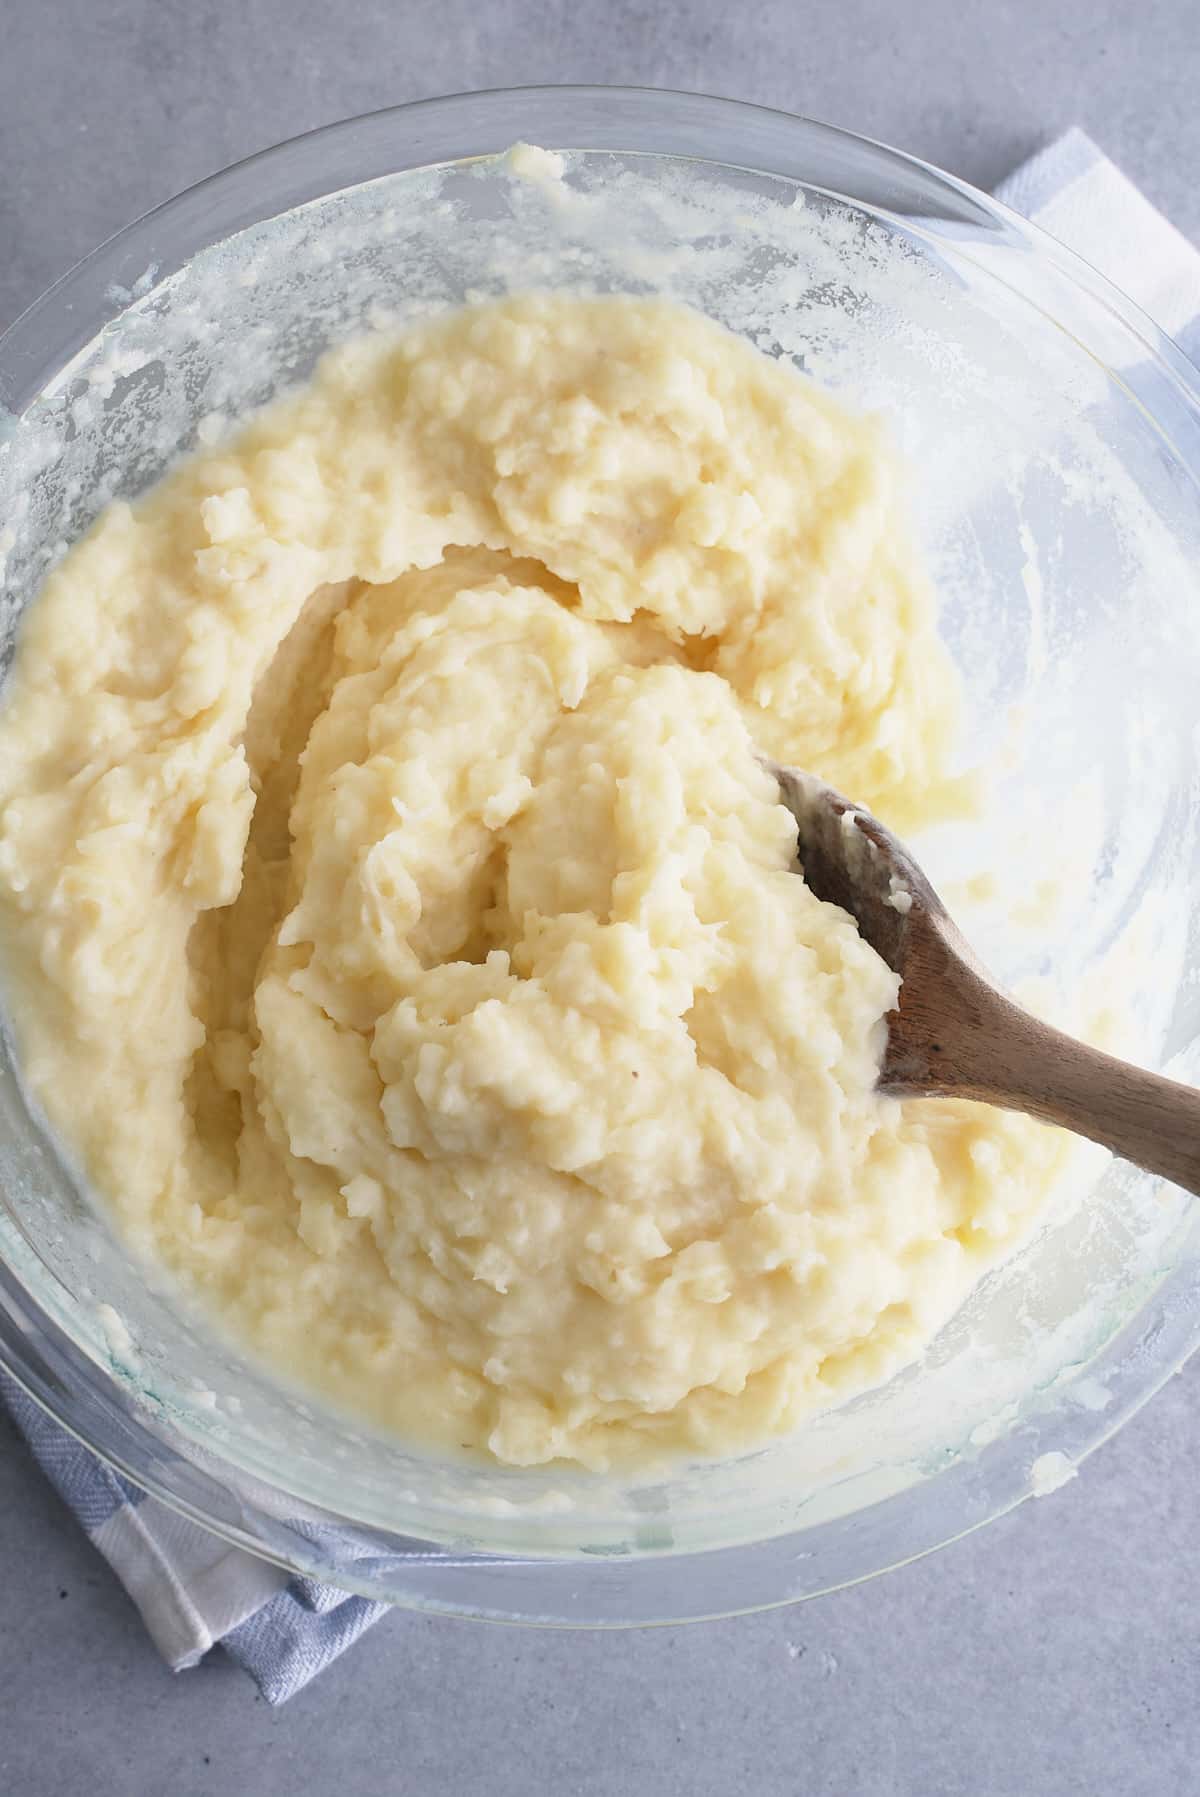 A glass bowl filled with mashed potatoes being stirred with a wooden spoon.